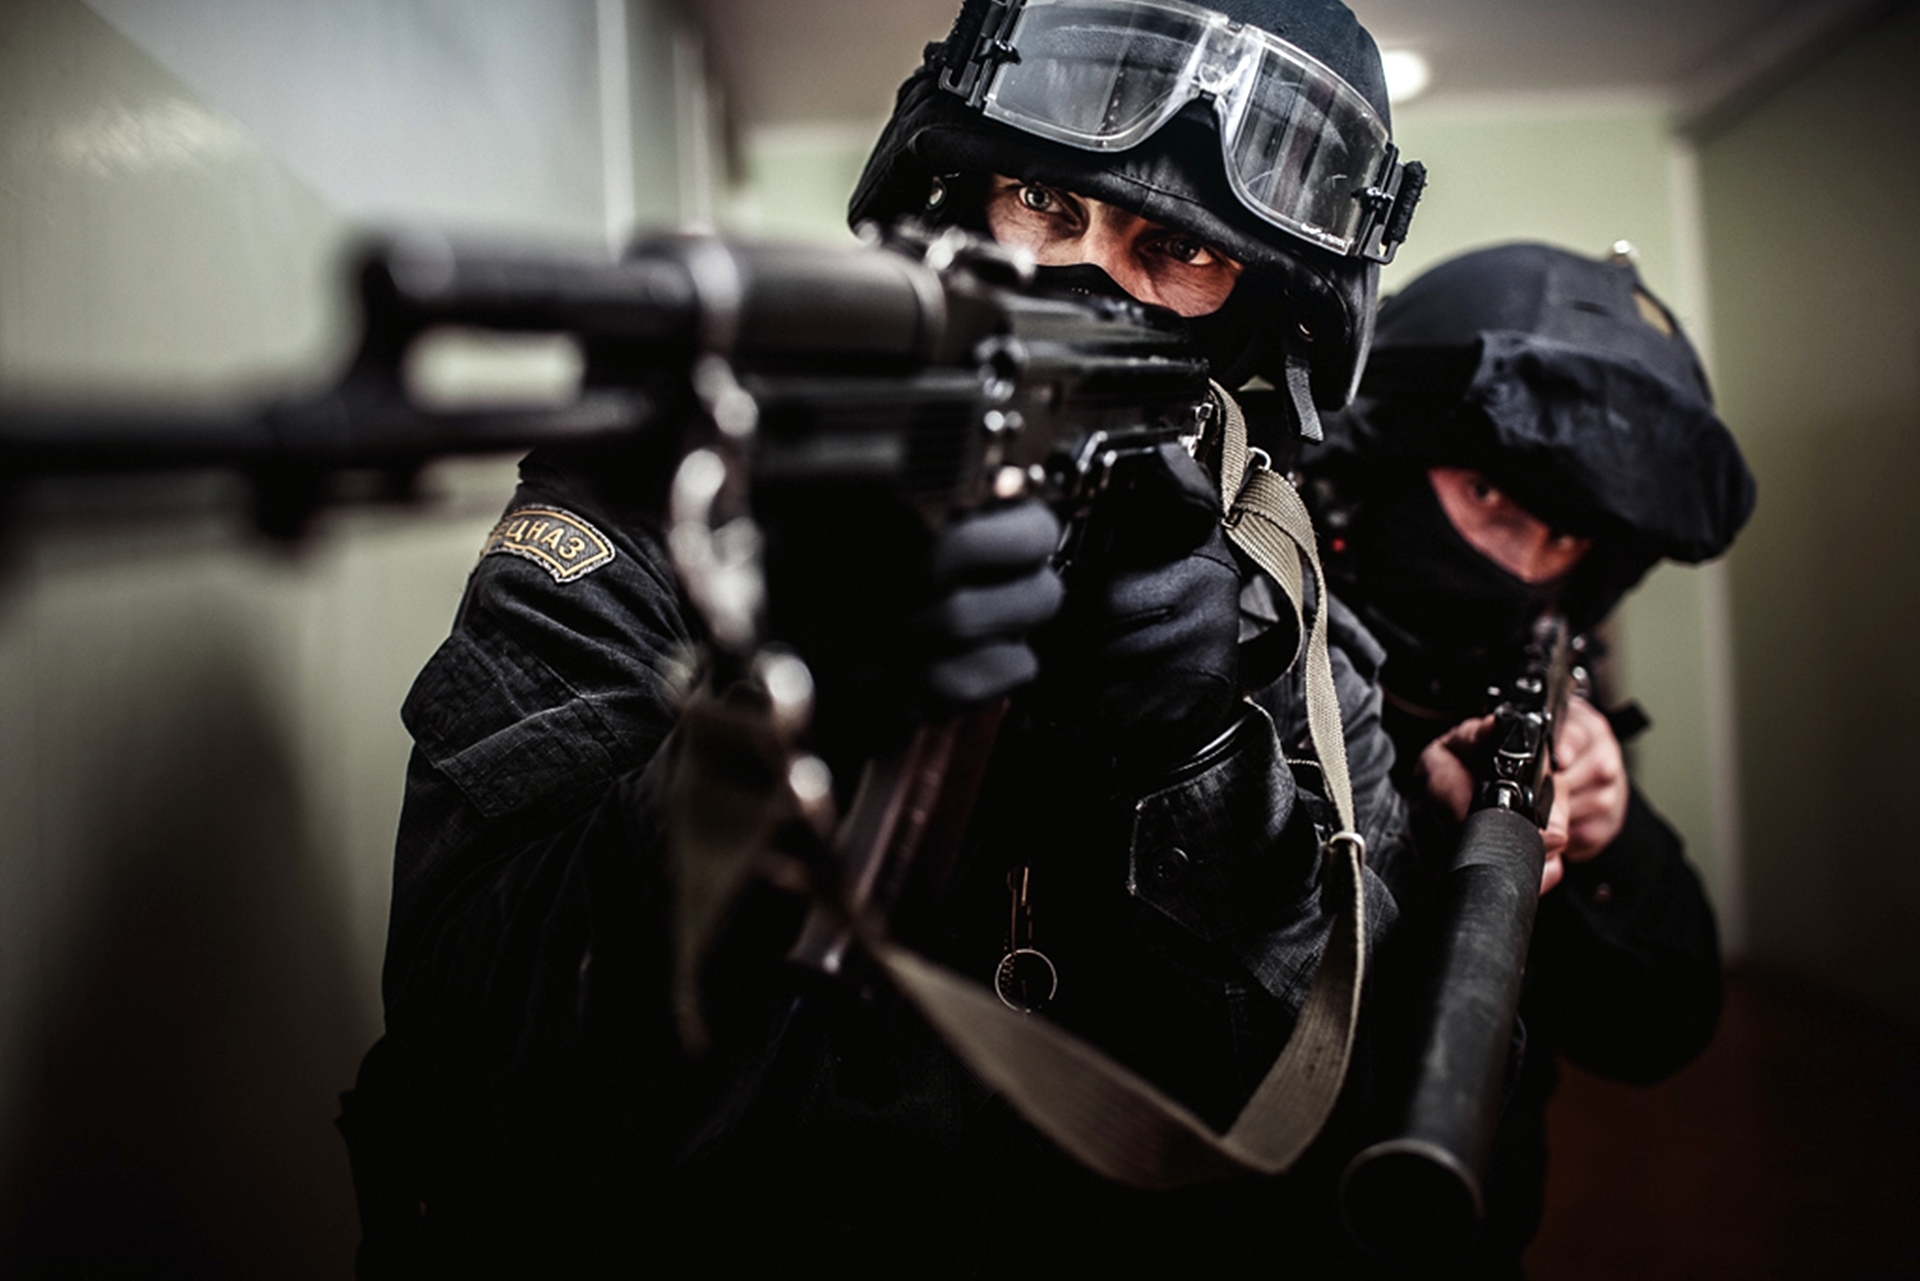 swat, Ak 47, As, Val, Military, Police, People, Men, Males, Warriors, Soldiers, Weapons, Guns, Rifles, Goggles, Glasses, Eyes Wallpaper